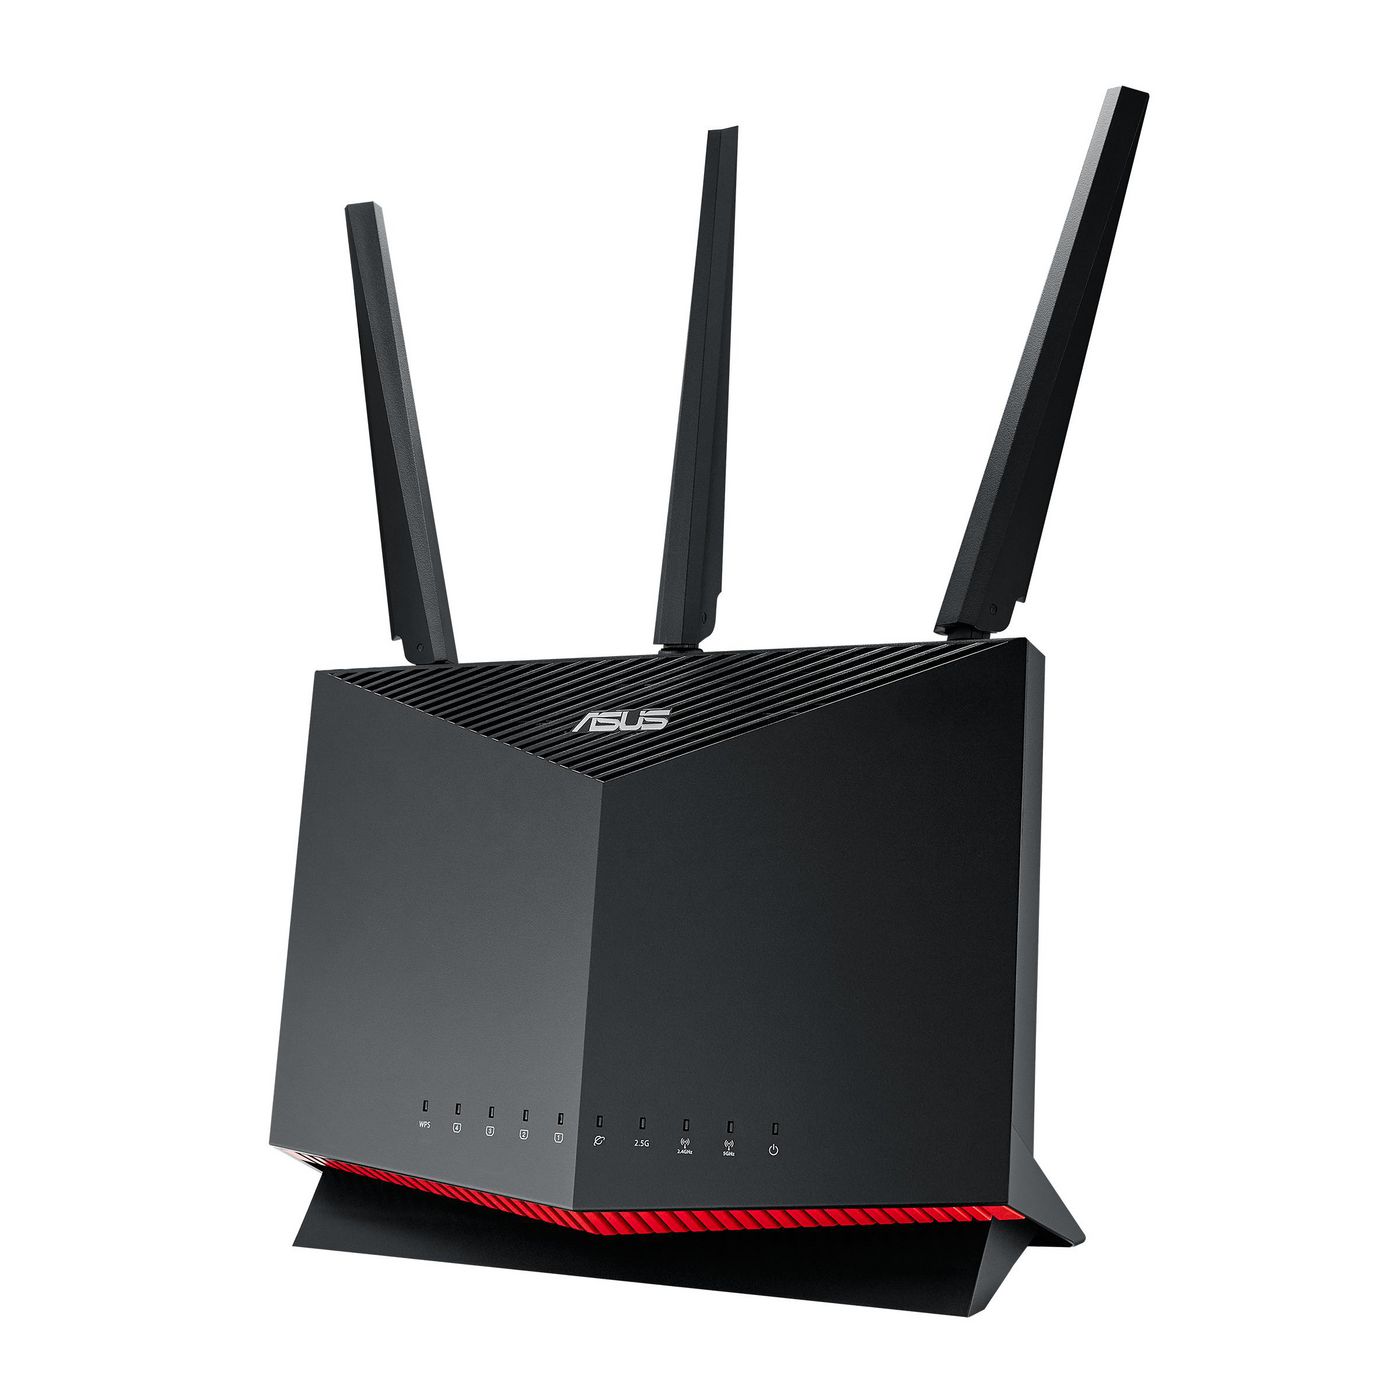 Asus 90IG05F0-MU2A00 W128263601 Rt-Ax86S Wireless Router 